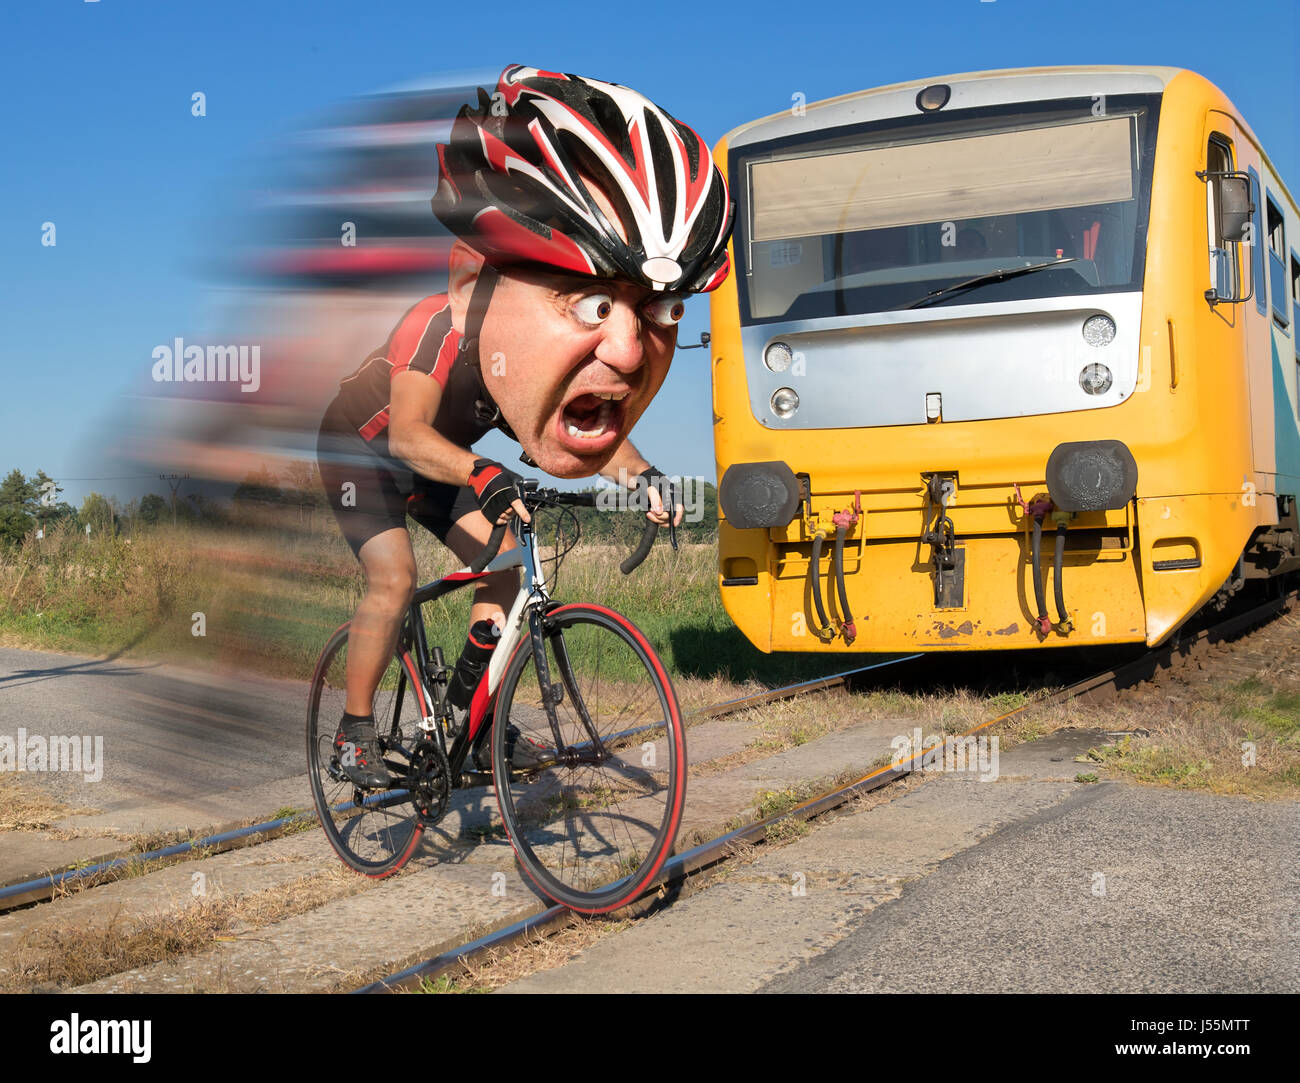 Terrified cyclist is rushing before by train on the tracks. Shocked biker ride a railway crossing in front of an approaching train. Stock Photo